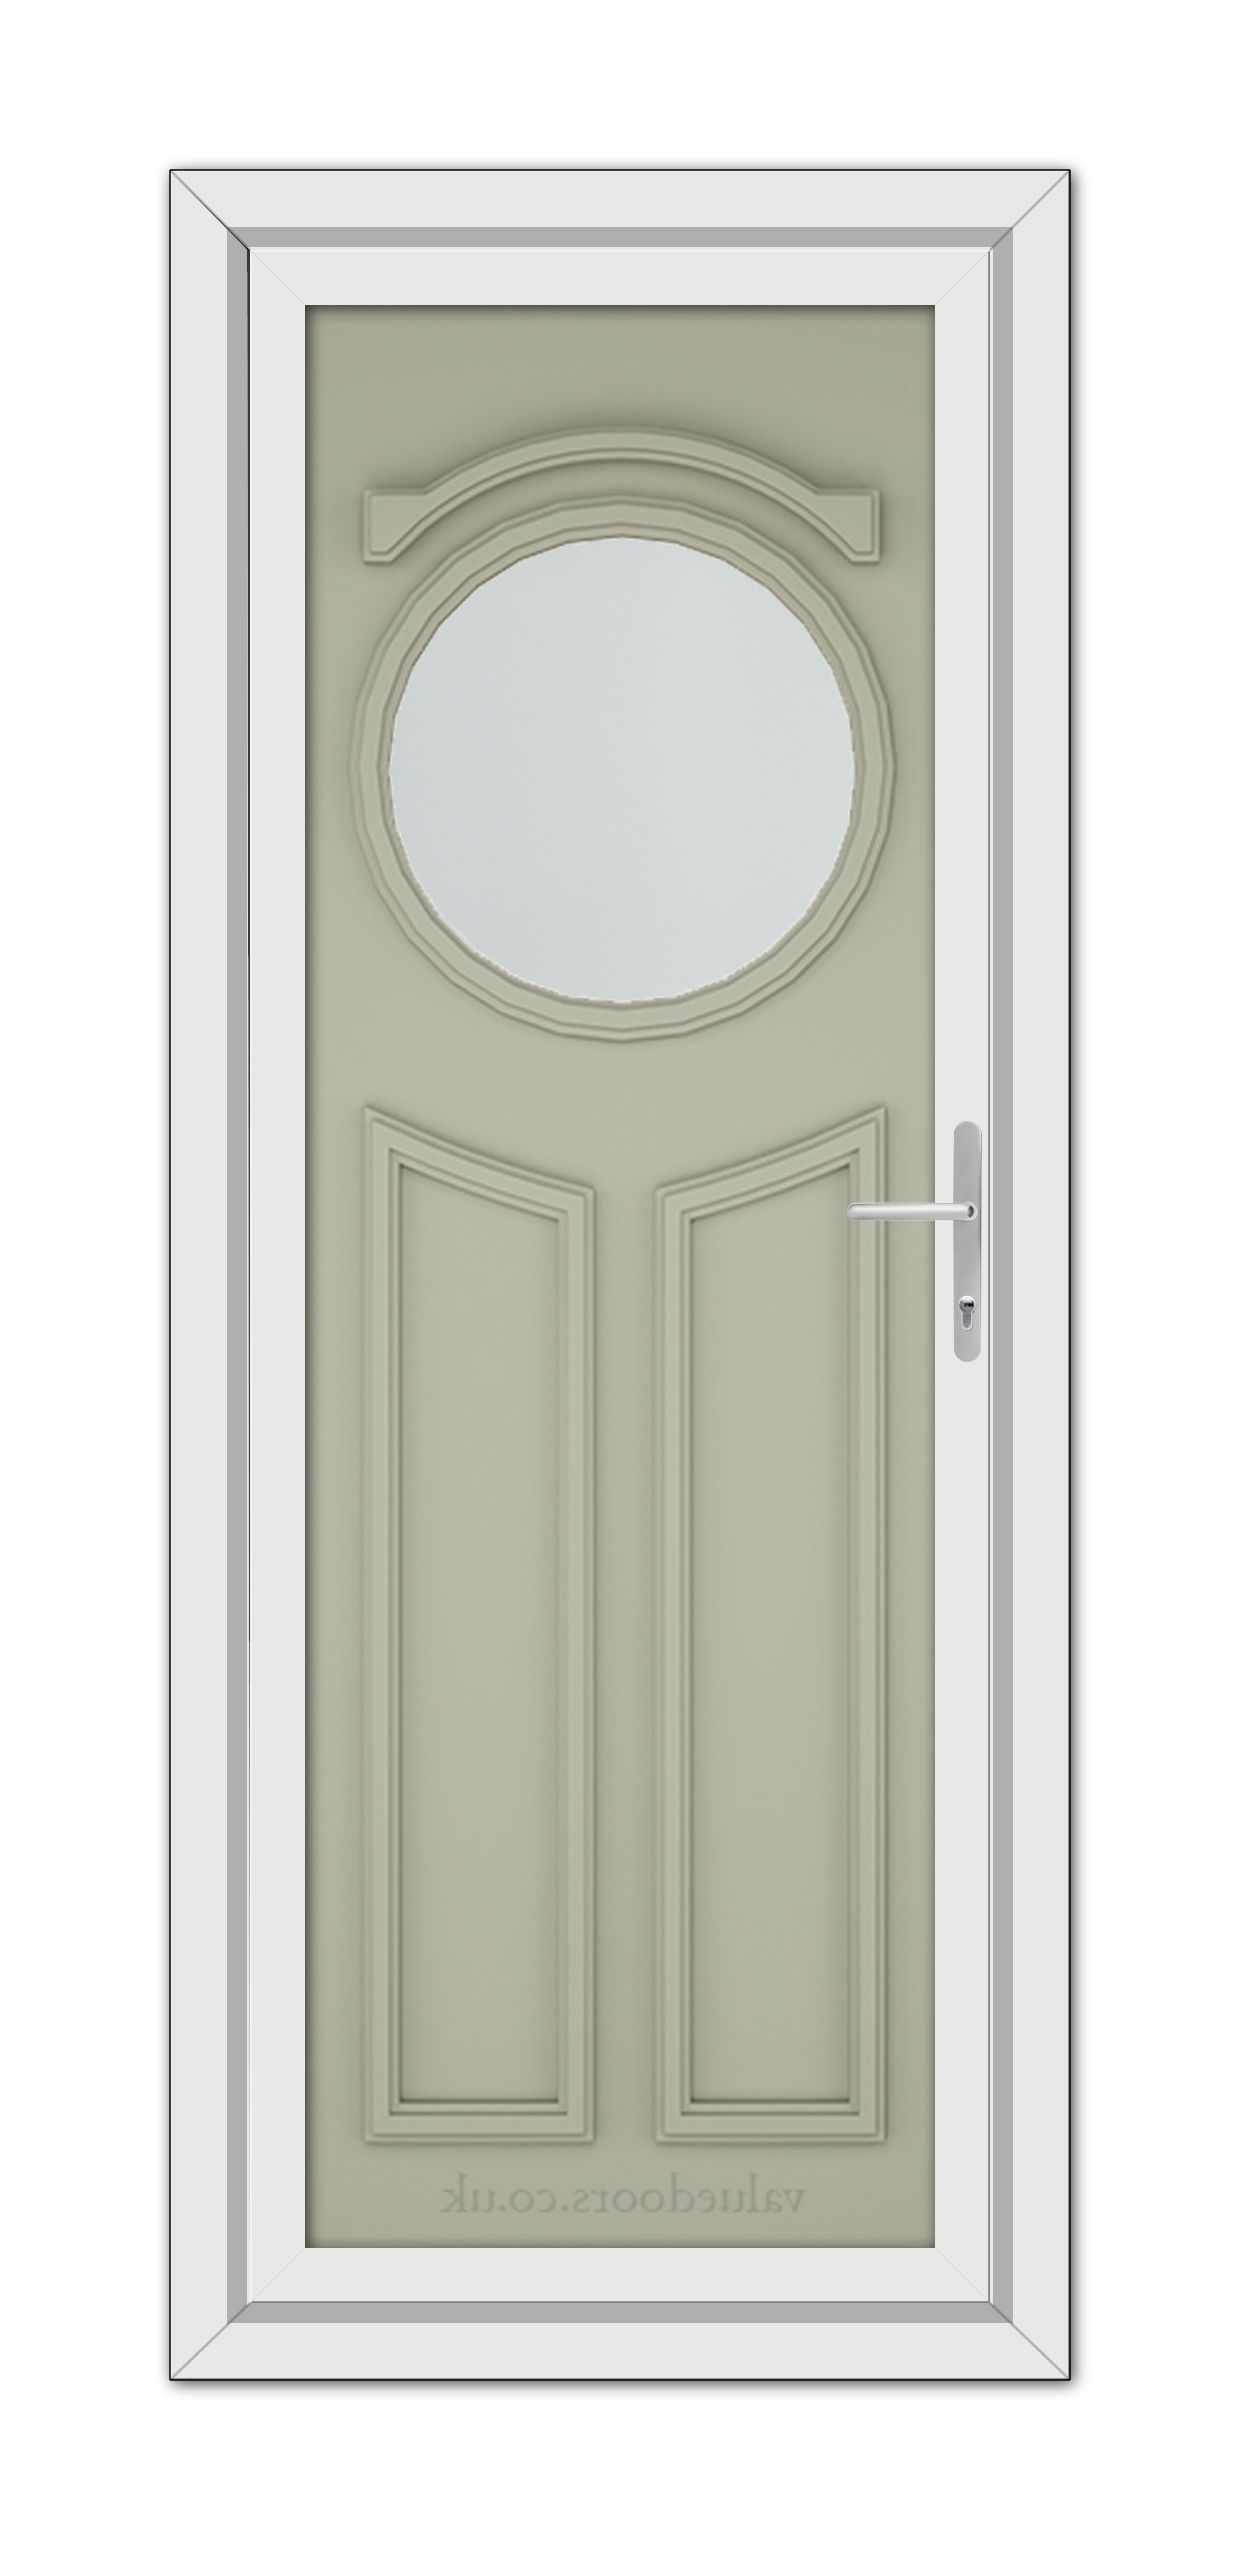 A agate grey front door with an oval glass window at the top, framed by white trim and equipped with a modern handle.